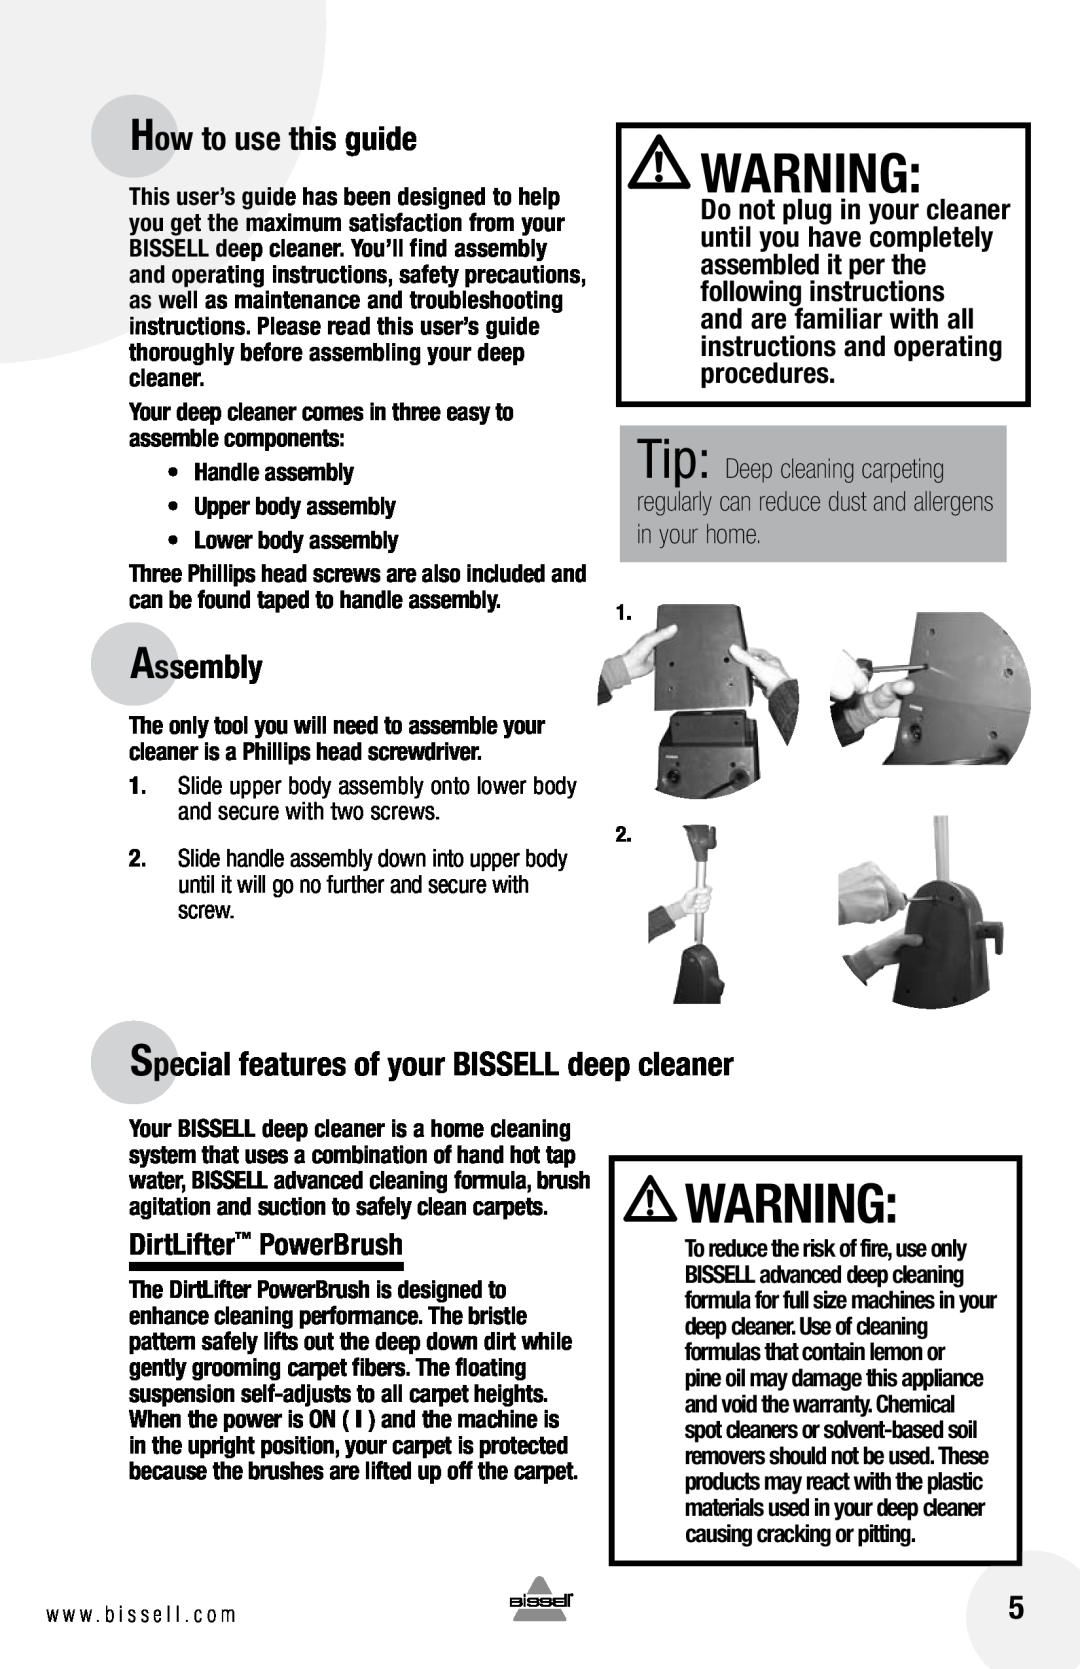 Bissell 1622 warranty How to use this guide, Assembly, Special features of your BISSELL deep cleaner, DirtLifter PowerBrush 